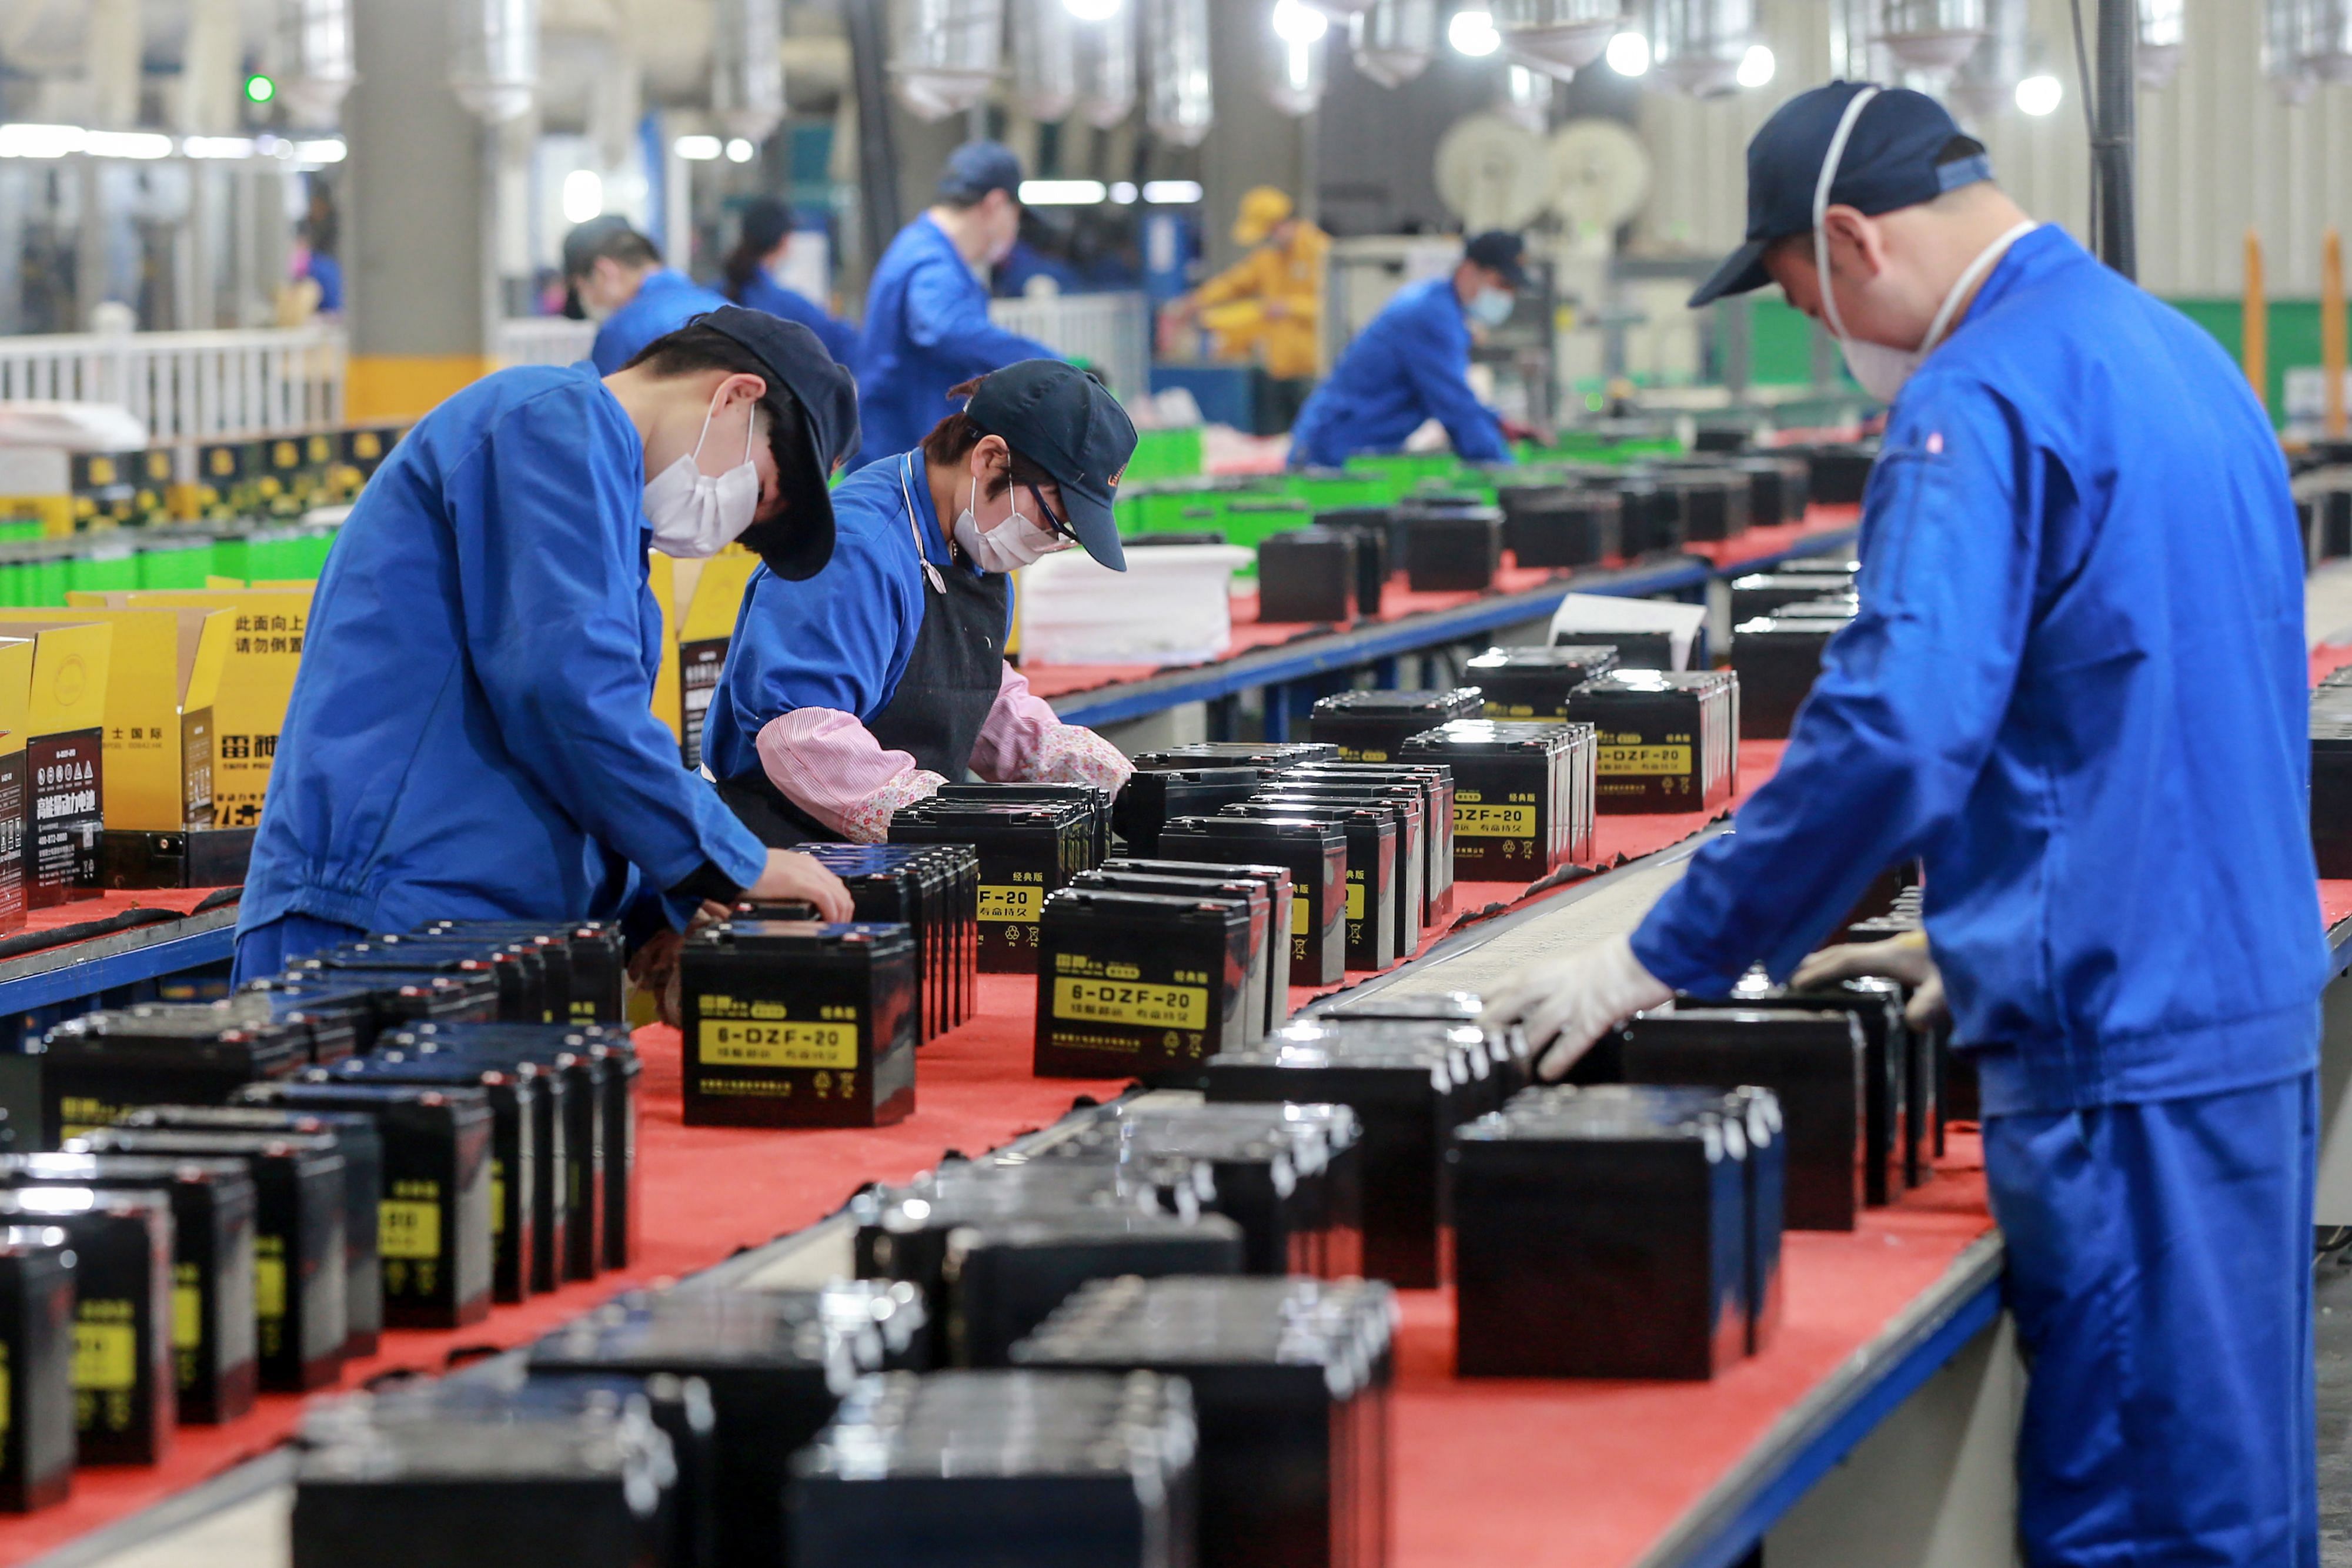 This photo taken on March 30, 2020 shows employees working on a battery production line at a factory in Huaibei in China's eastern Anhui province. (Credit: AFP Photo)